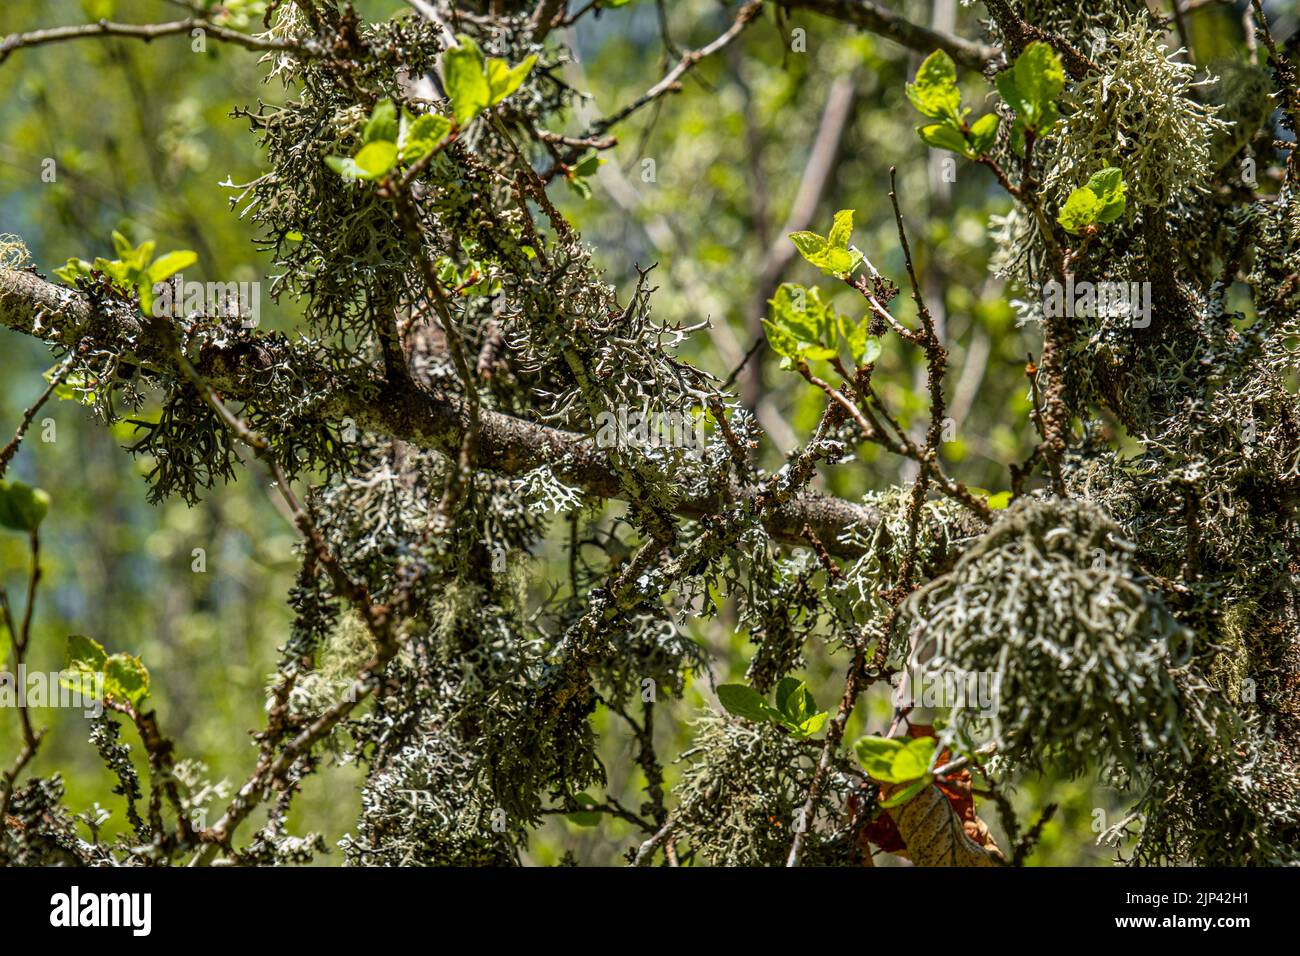 Straw beard lichen, other fungi and moss on the tree branch Stock Photo